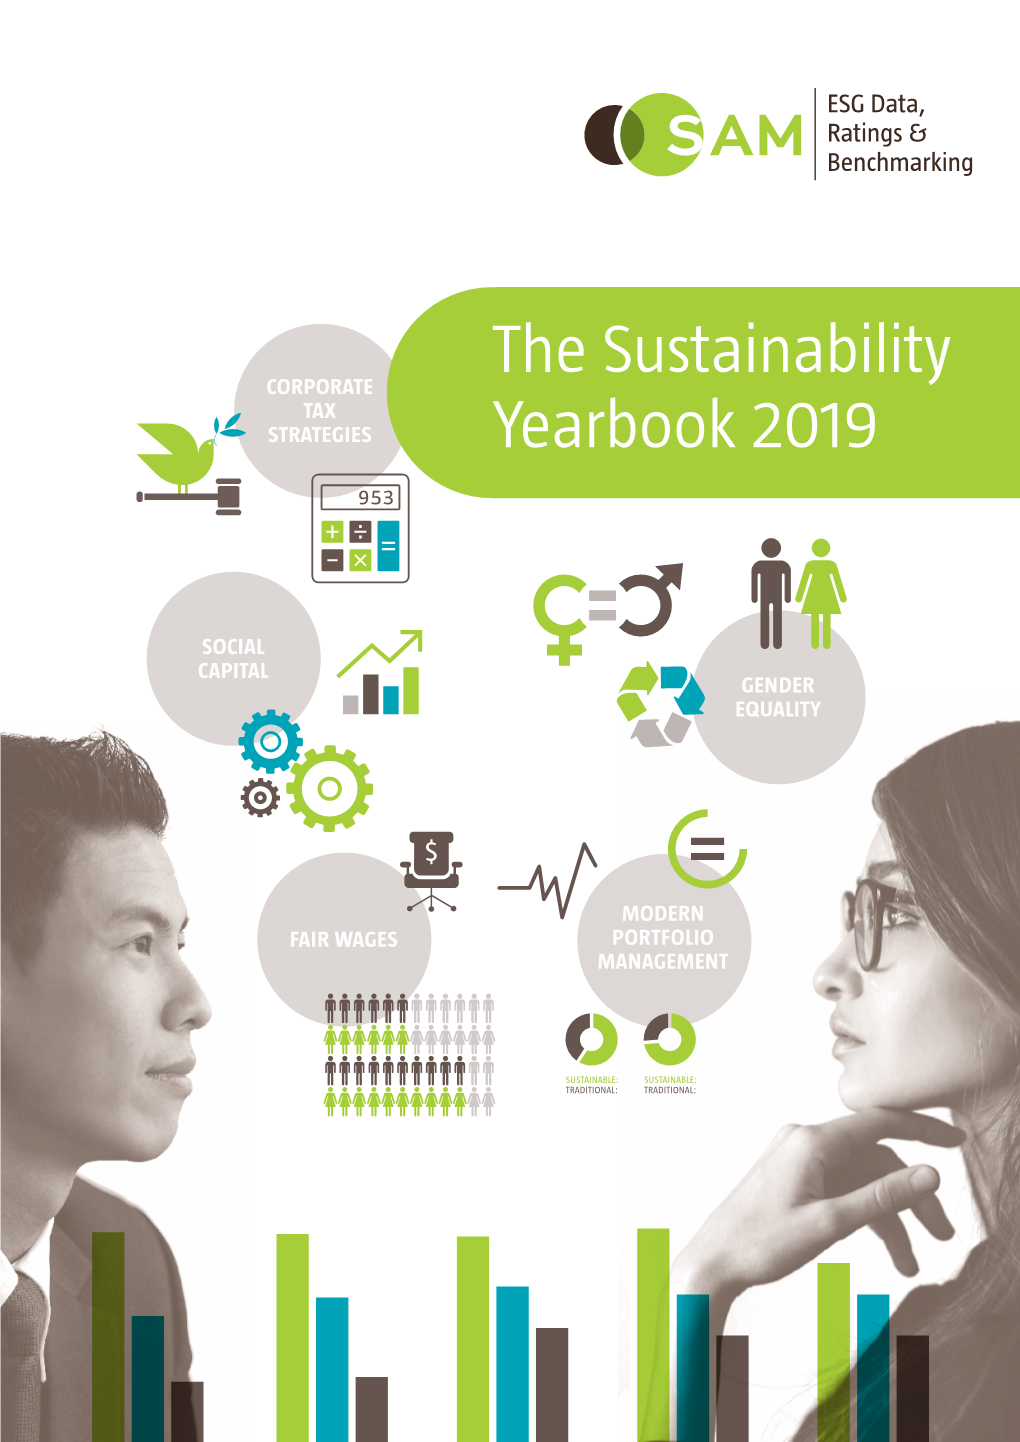 The Sustainability Yearbook 2019